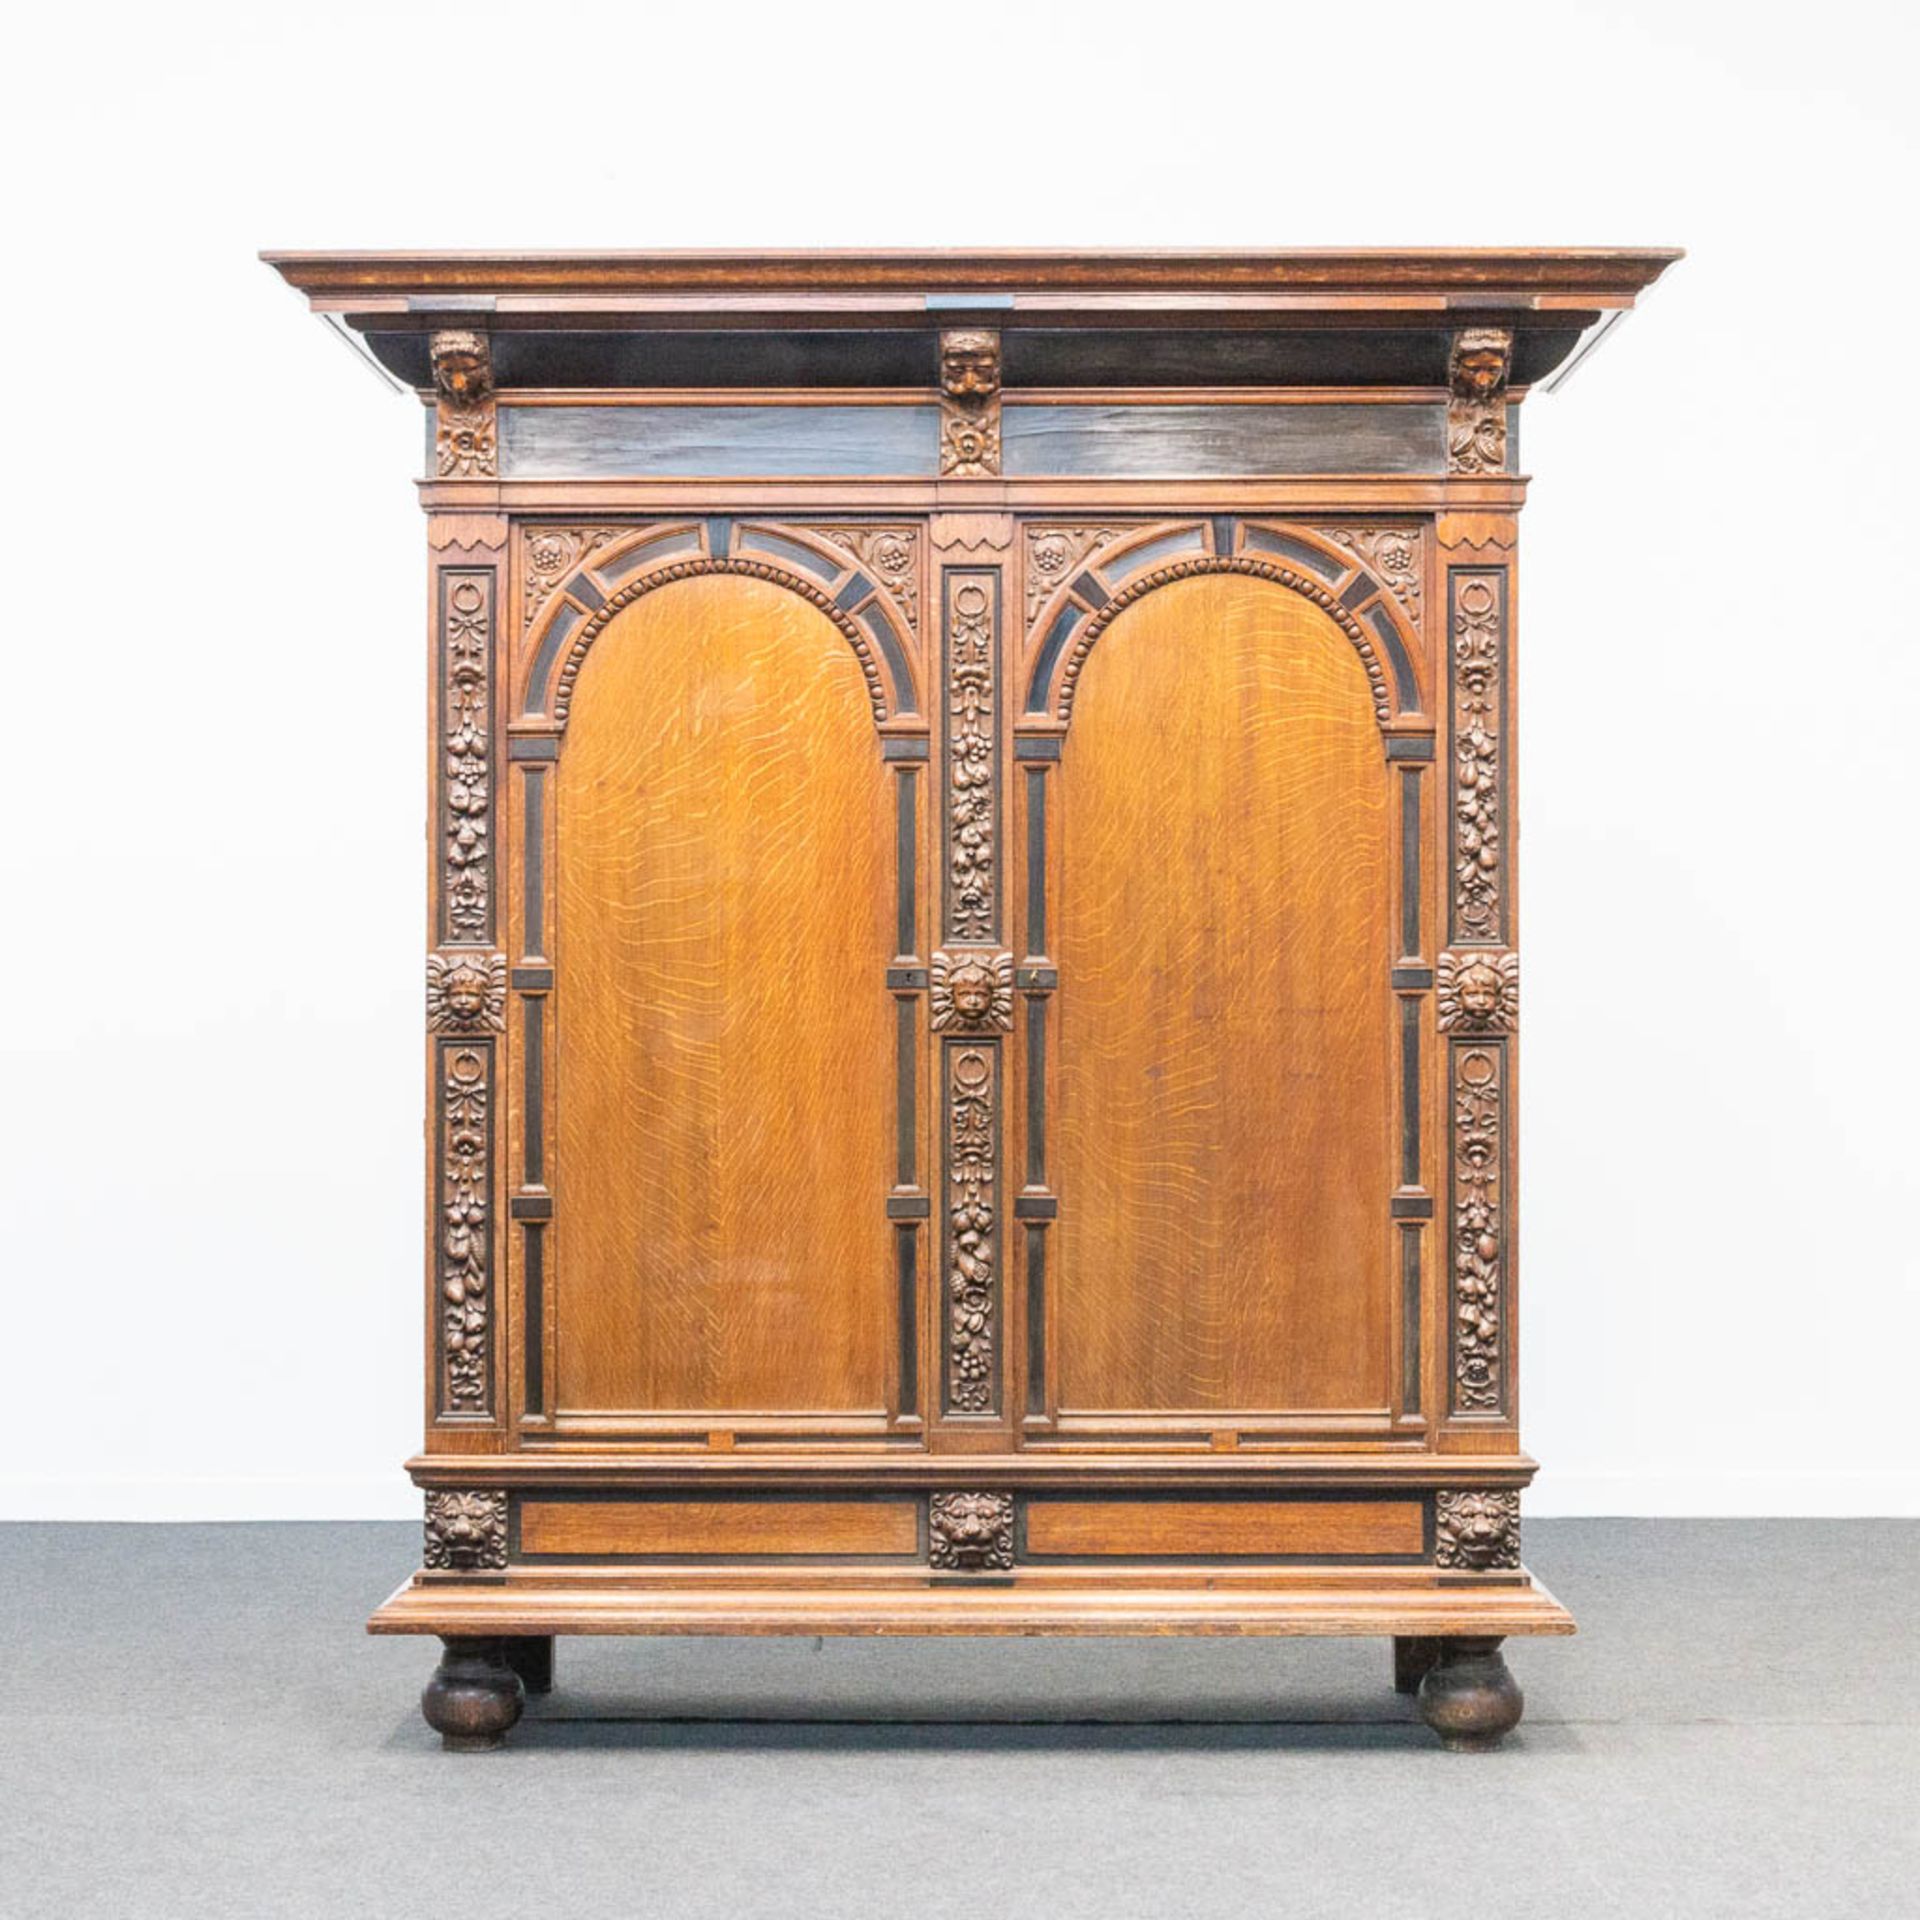 A portal cabinet, made un Utrecht, and made of oak combined with ebony, 19th century.